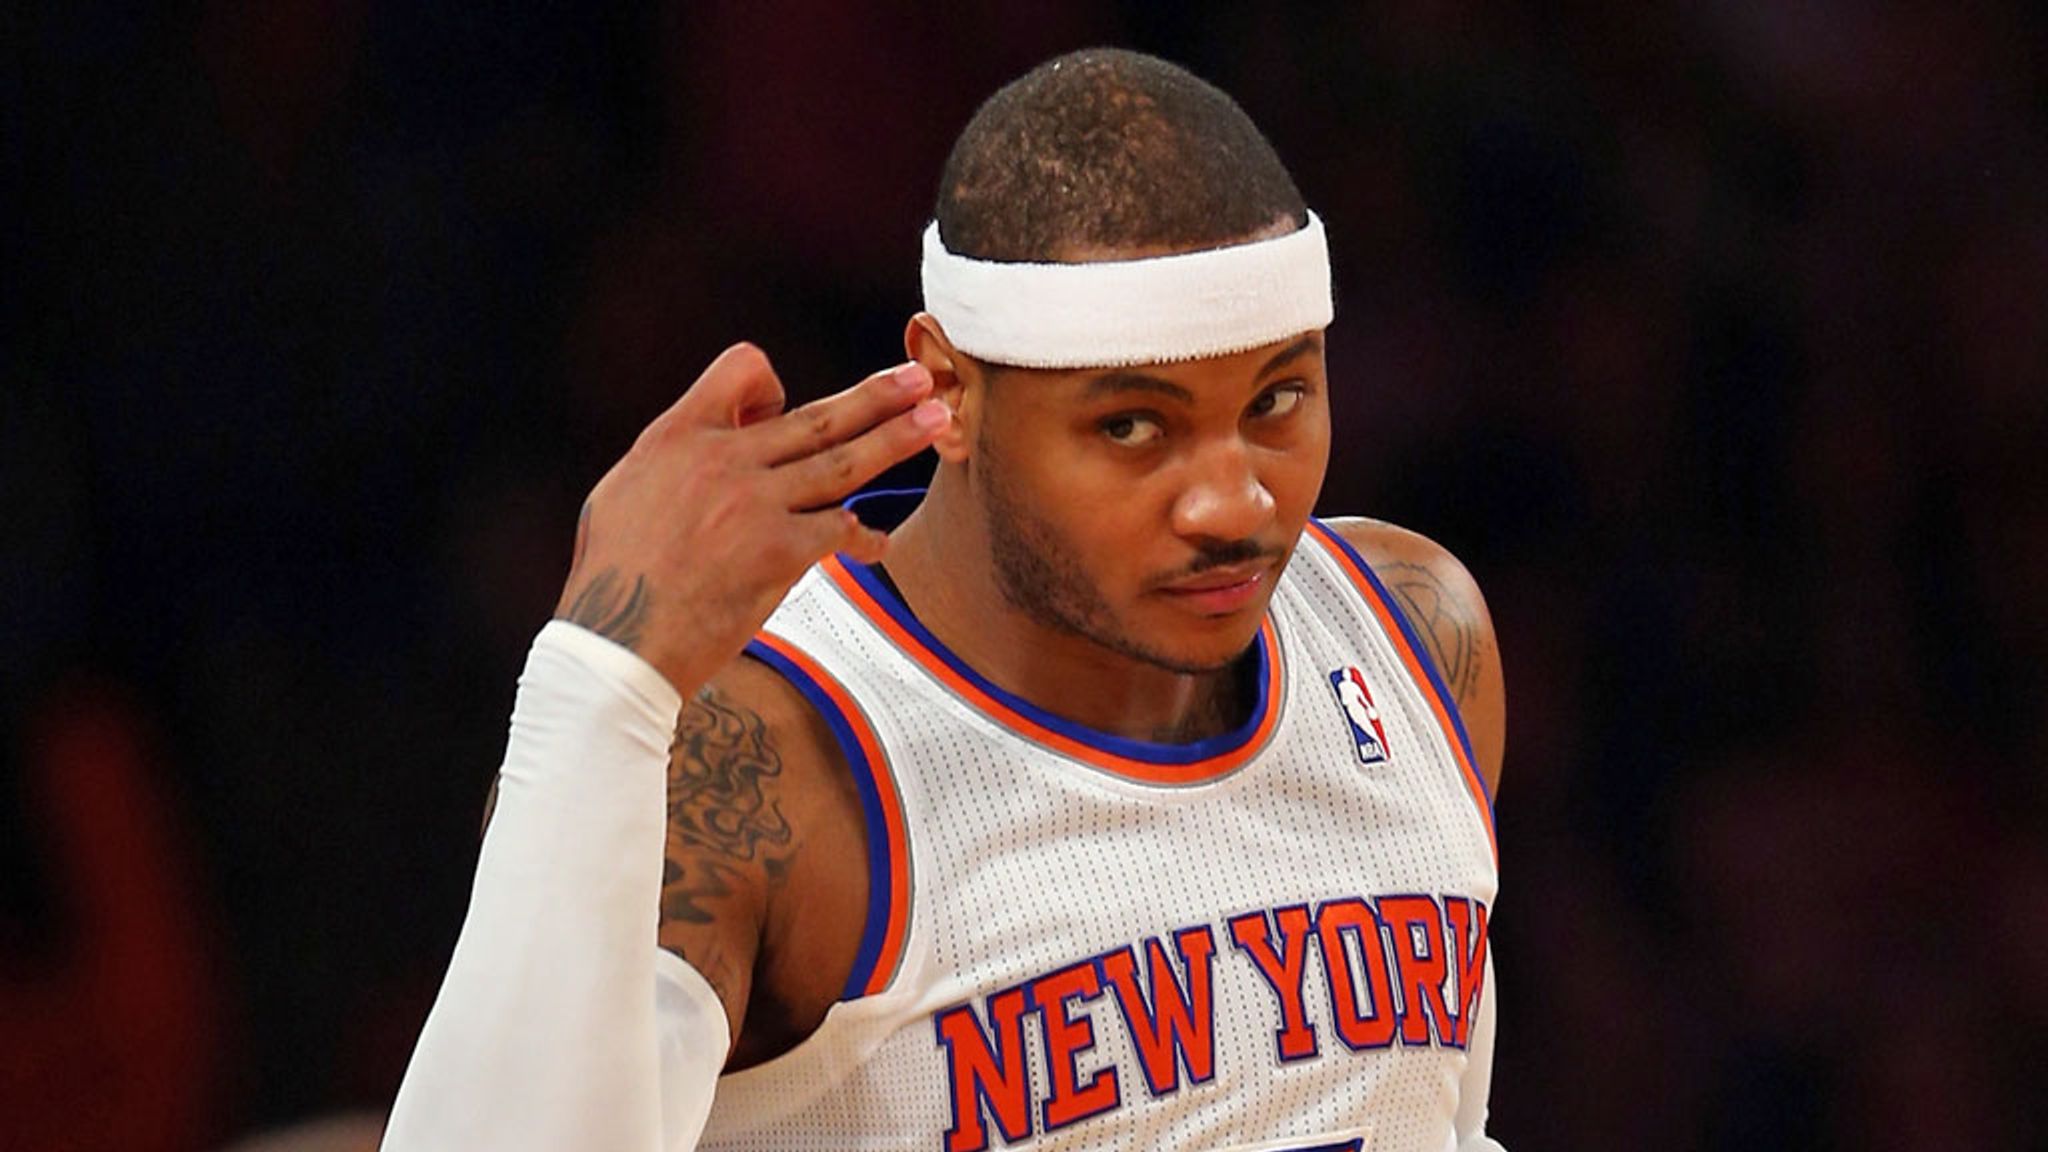 This is Carmelo Anthony and he is a 6'8 Small Forward. He plays for the New  York Knicks and wears Number…